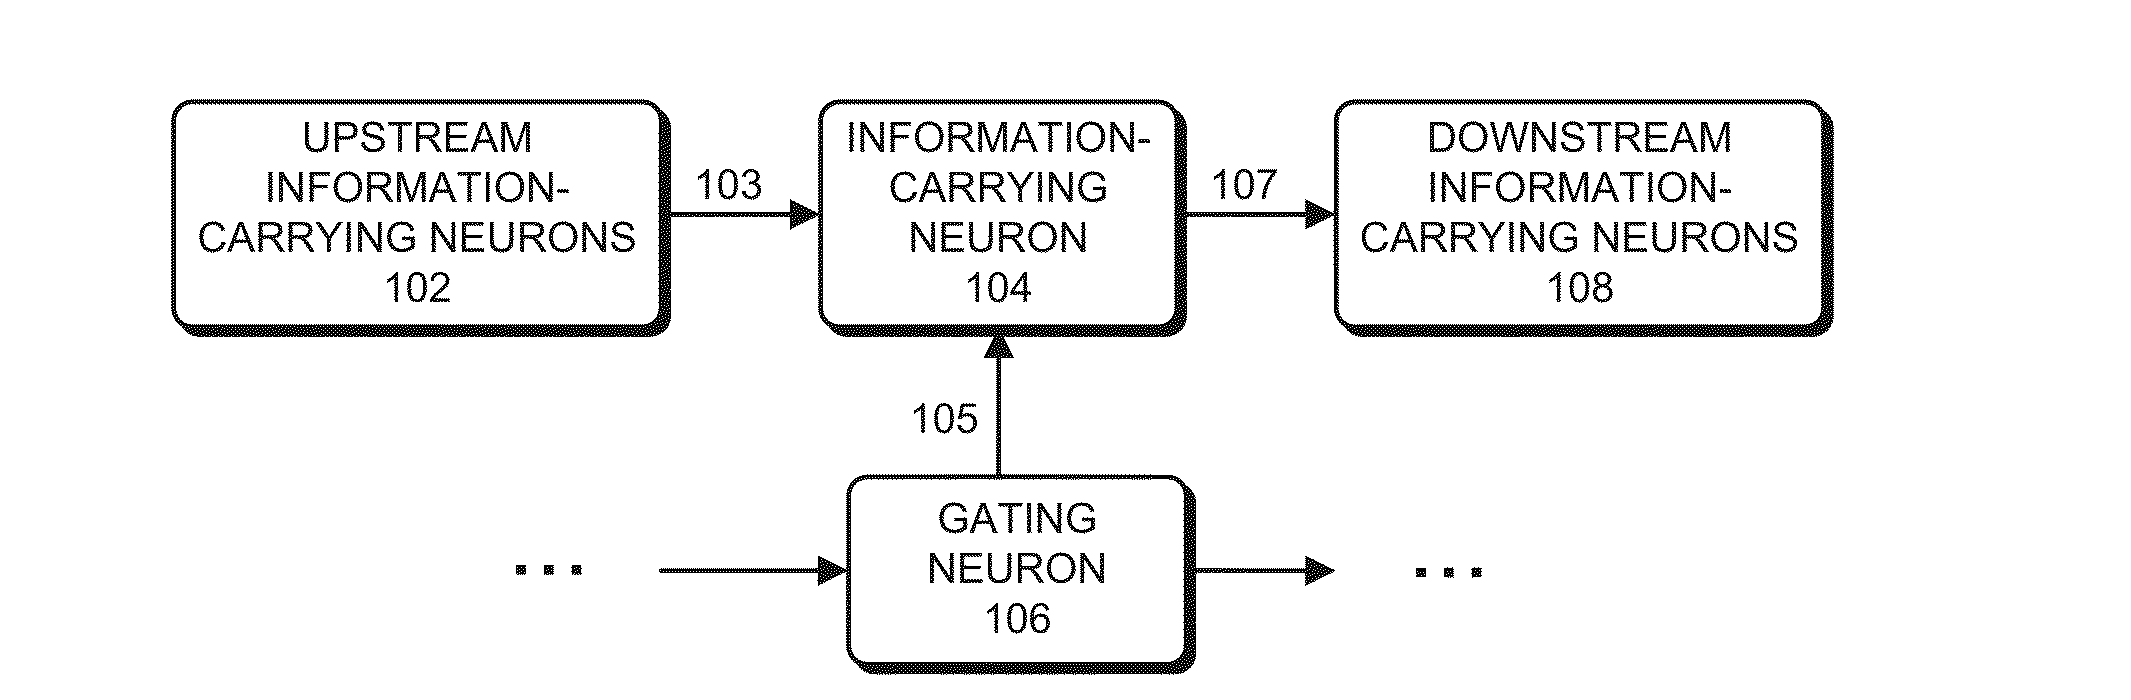 Neuromorphic circuit that facilitates information routing and processing